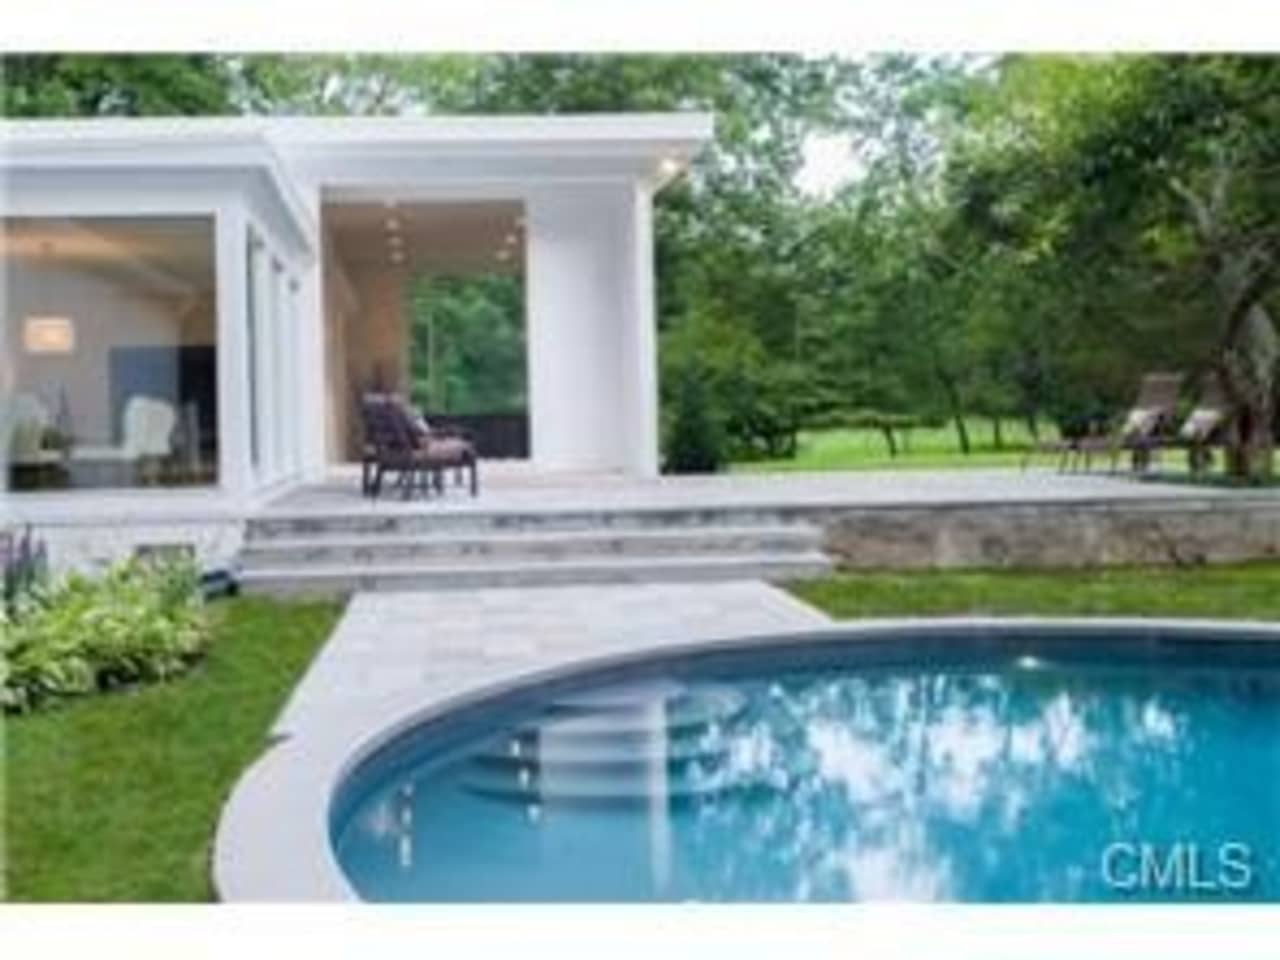 This house at 1528 Ponus Ridge in New Canaan is open for viewing this Sunday.